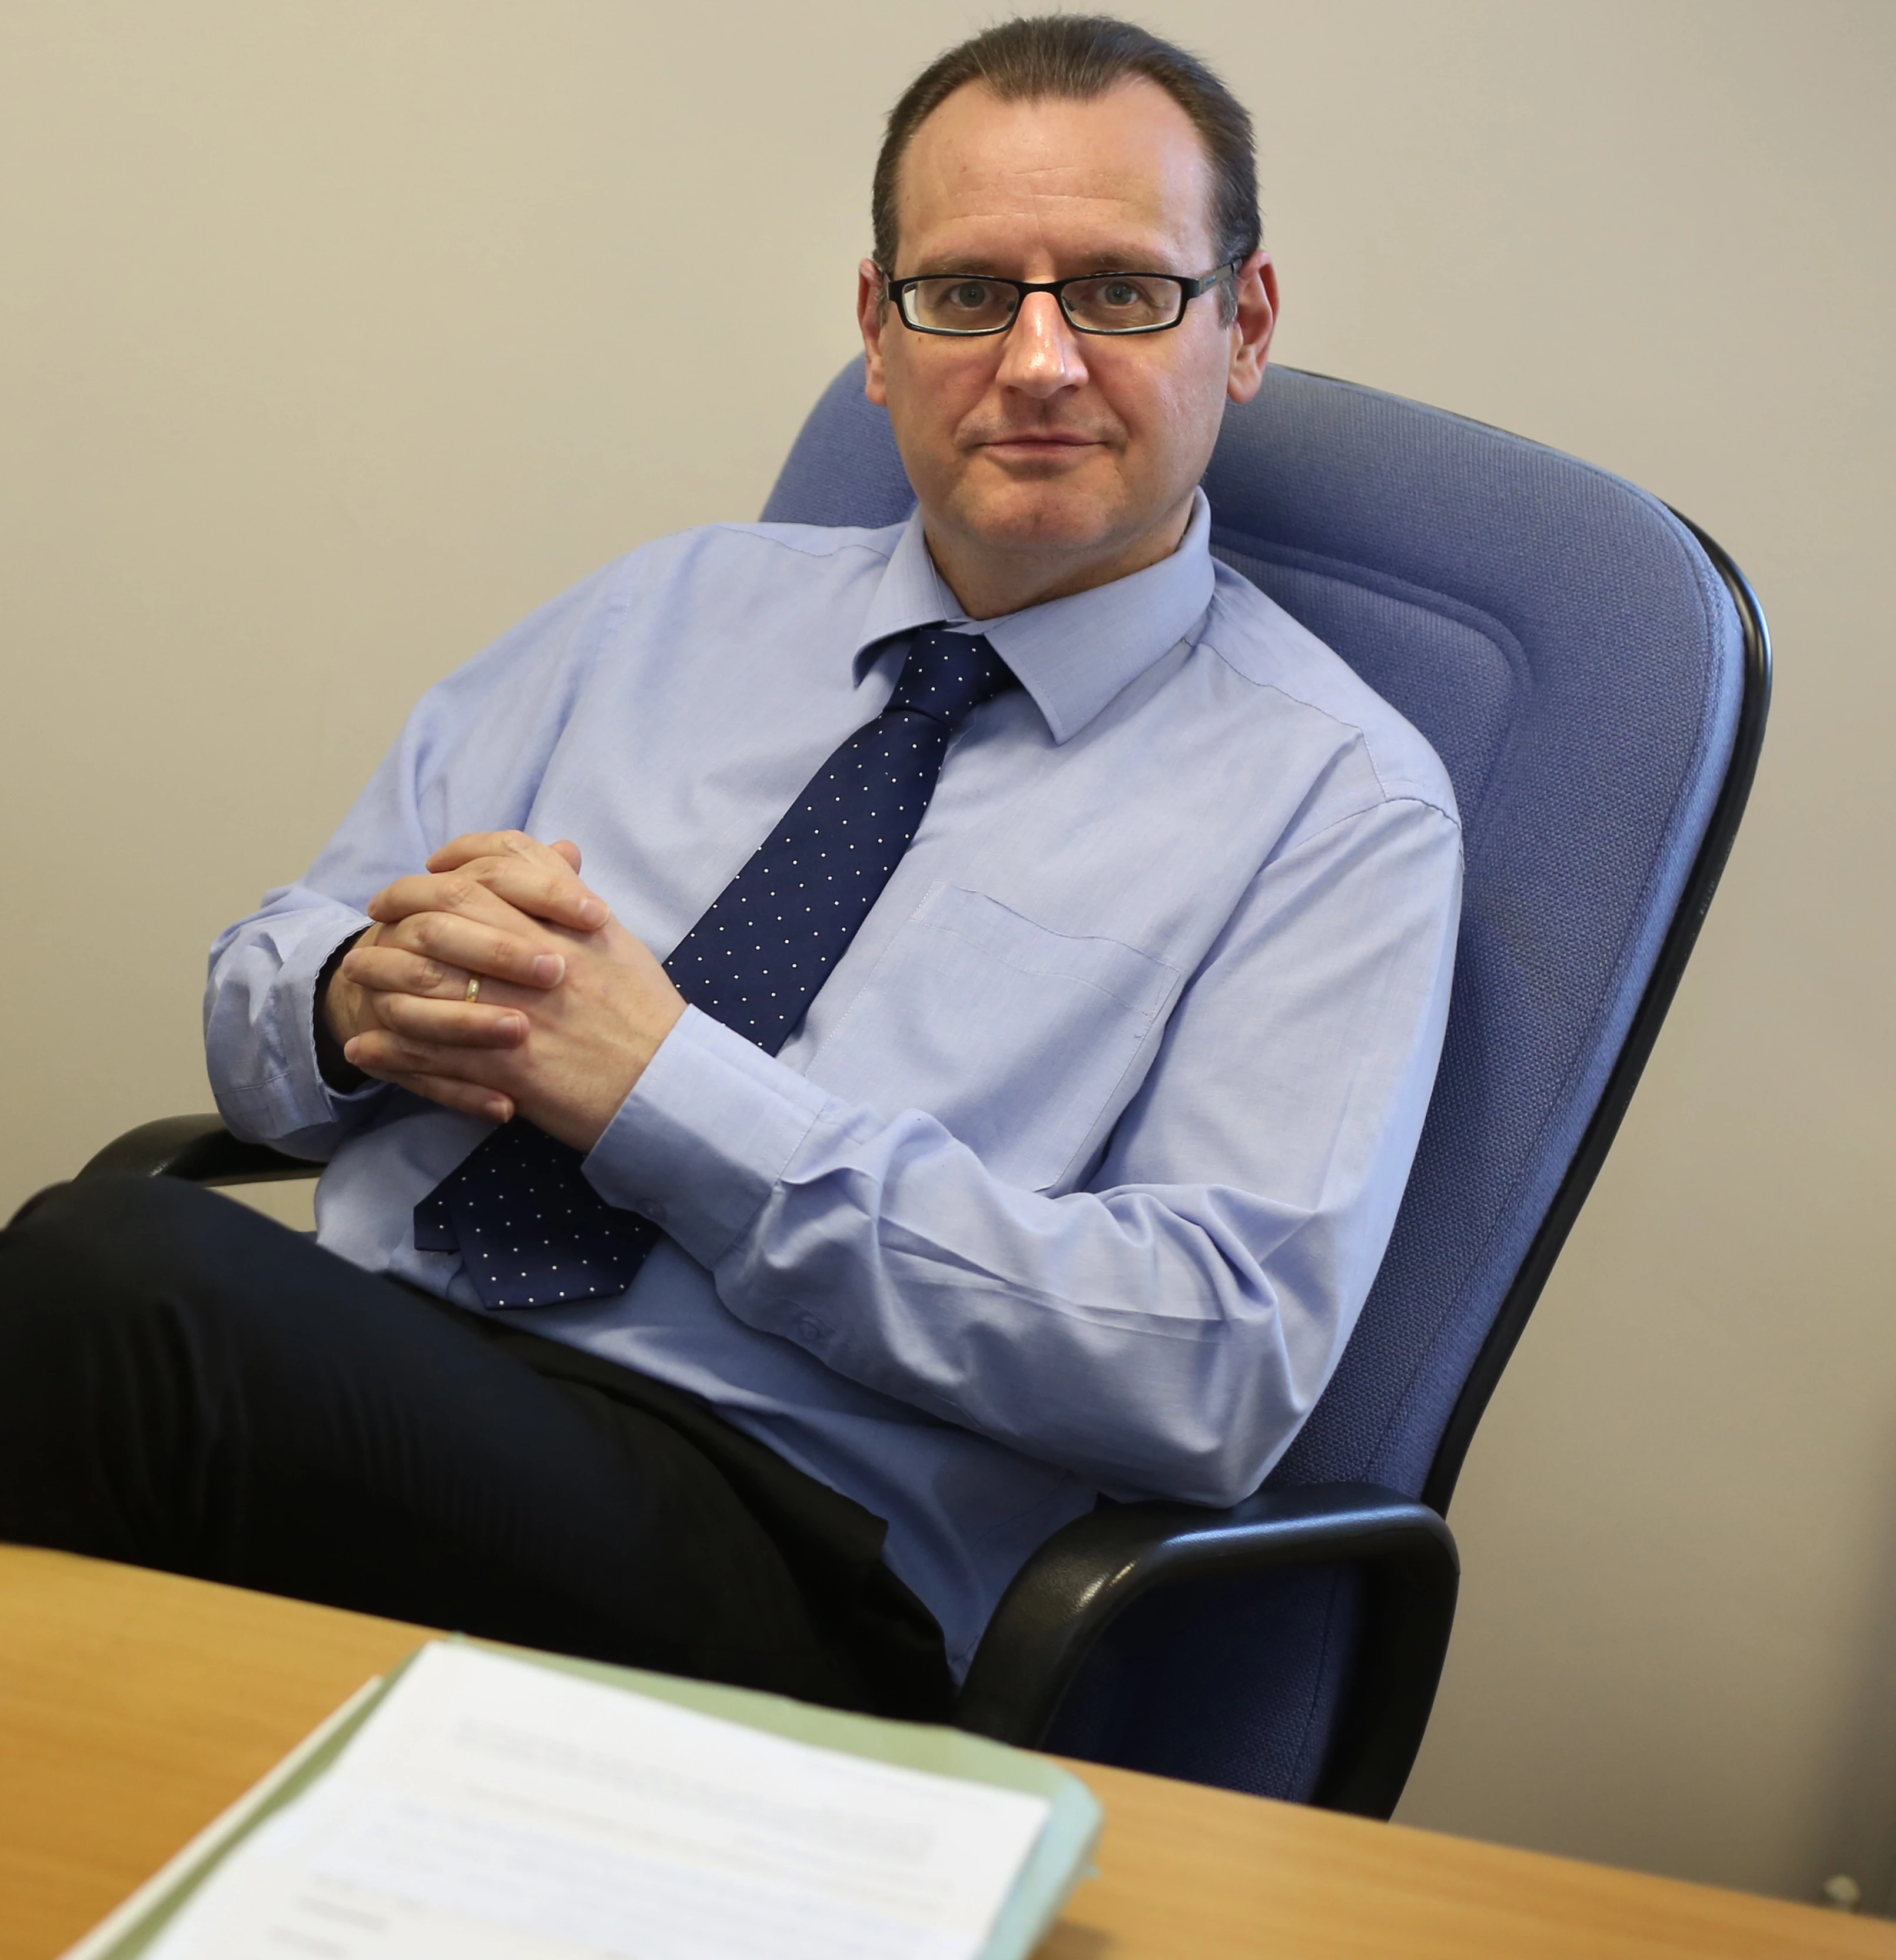 John Robinson, a Solicitor and Director at Cygnet Law